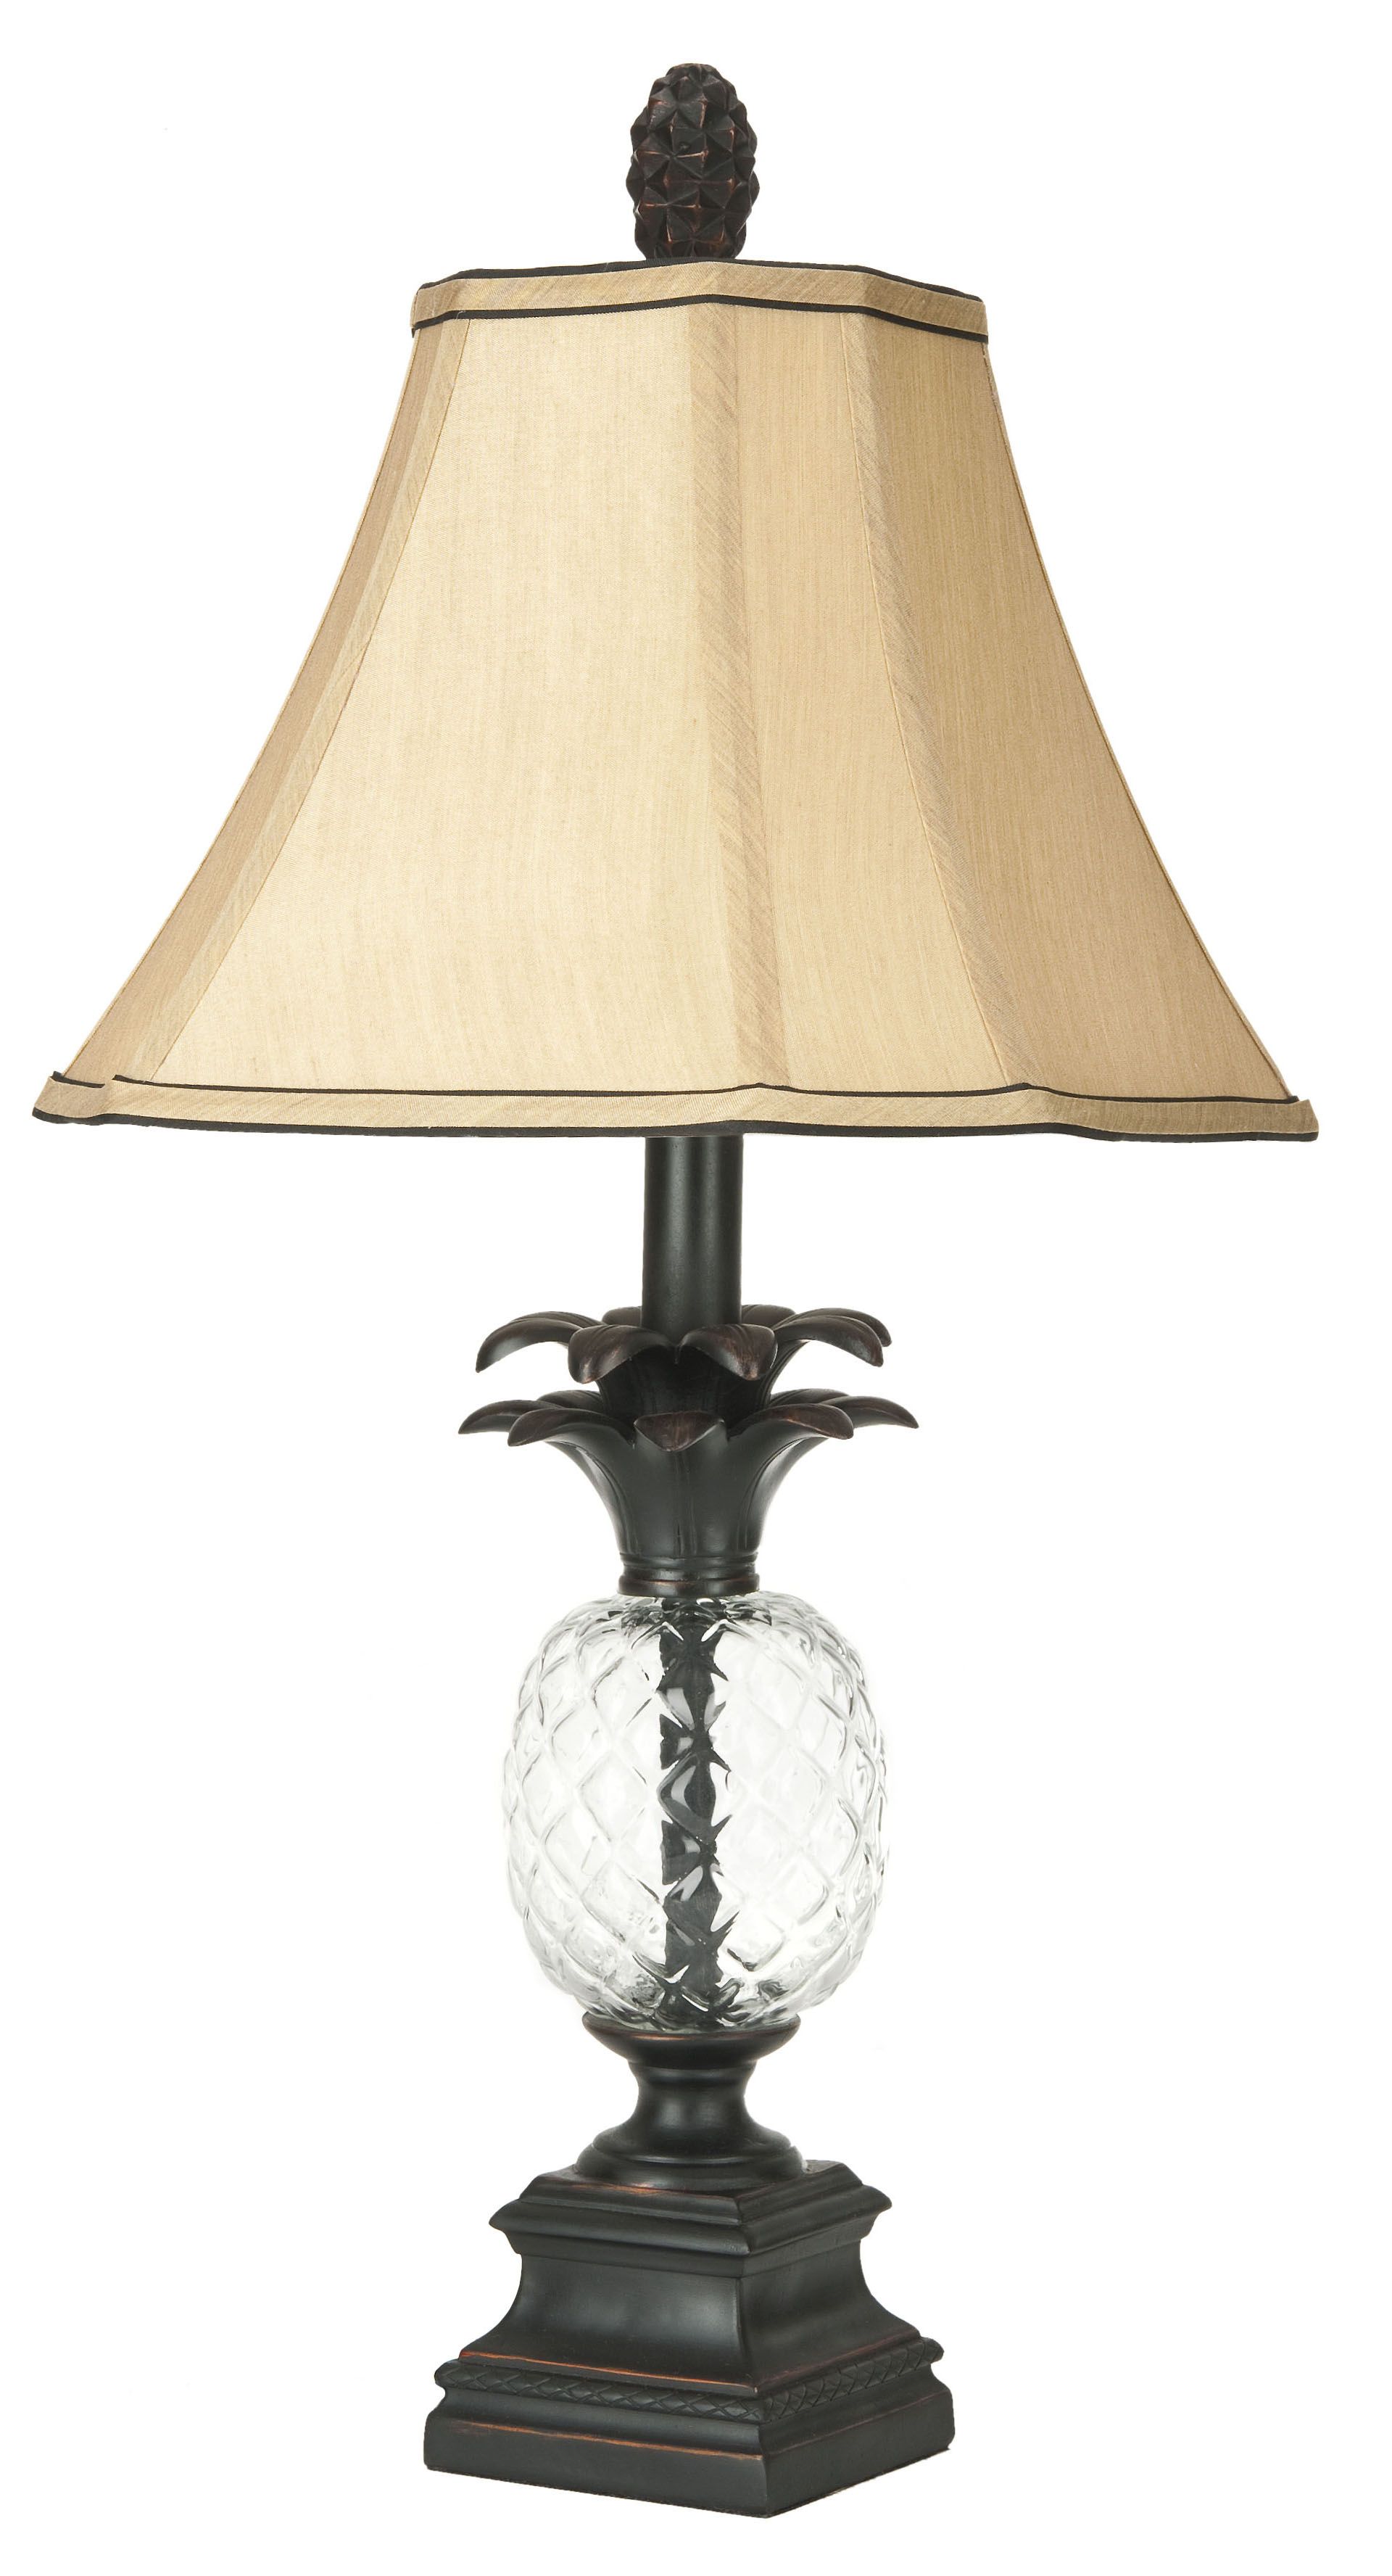 Alanna 24-Inch H Glass Pineapple Table Lamp - Black/Clear - Arlo Home